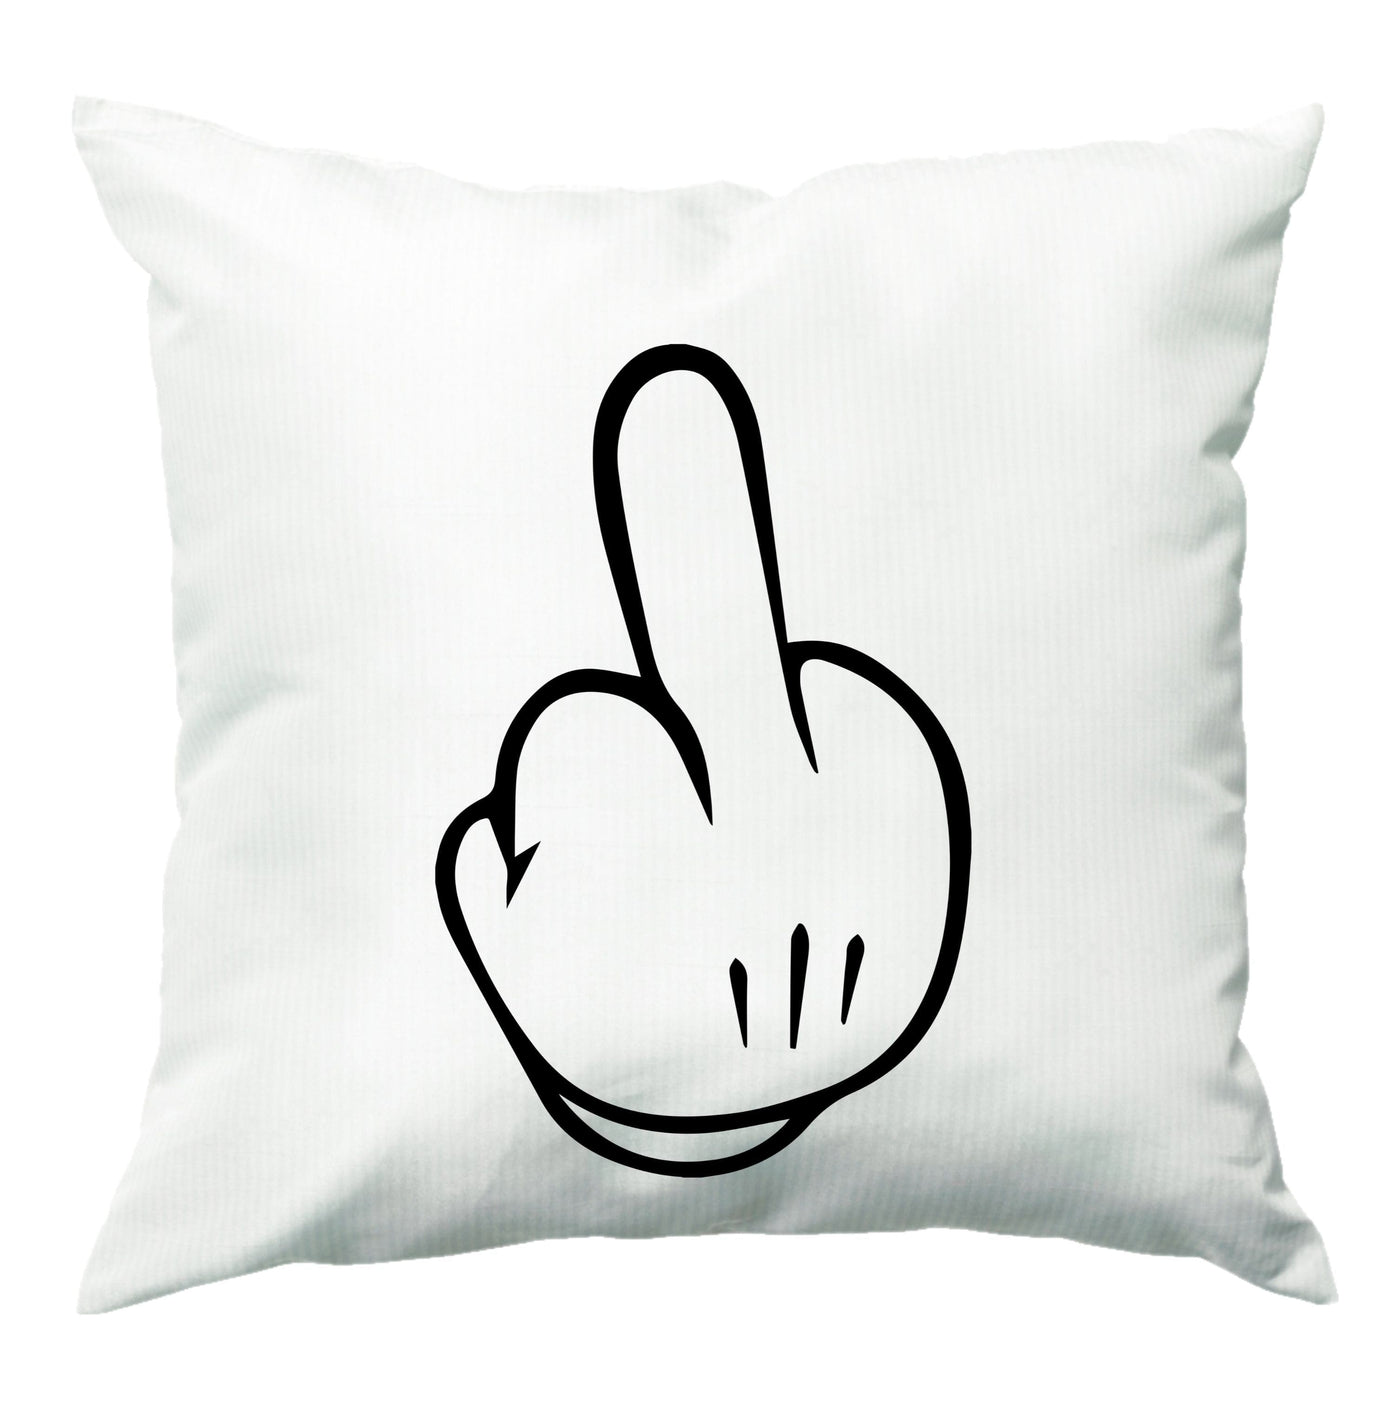 Mickey Mouse Middle Finger Cushion